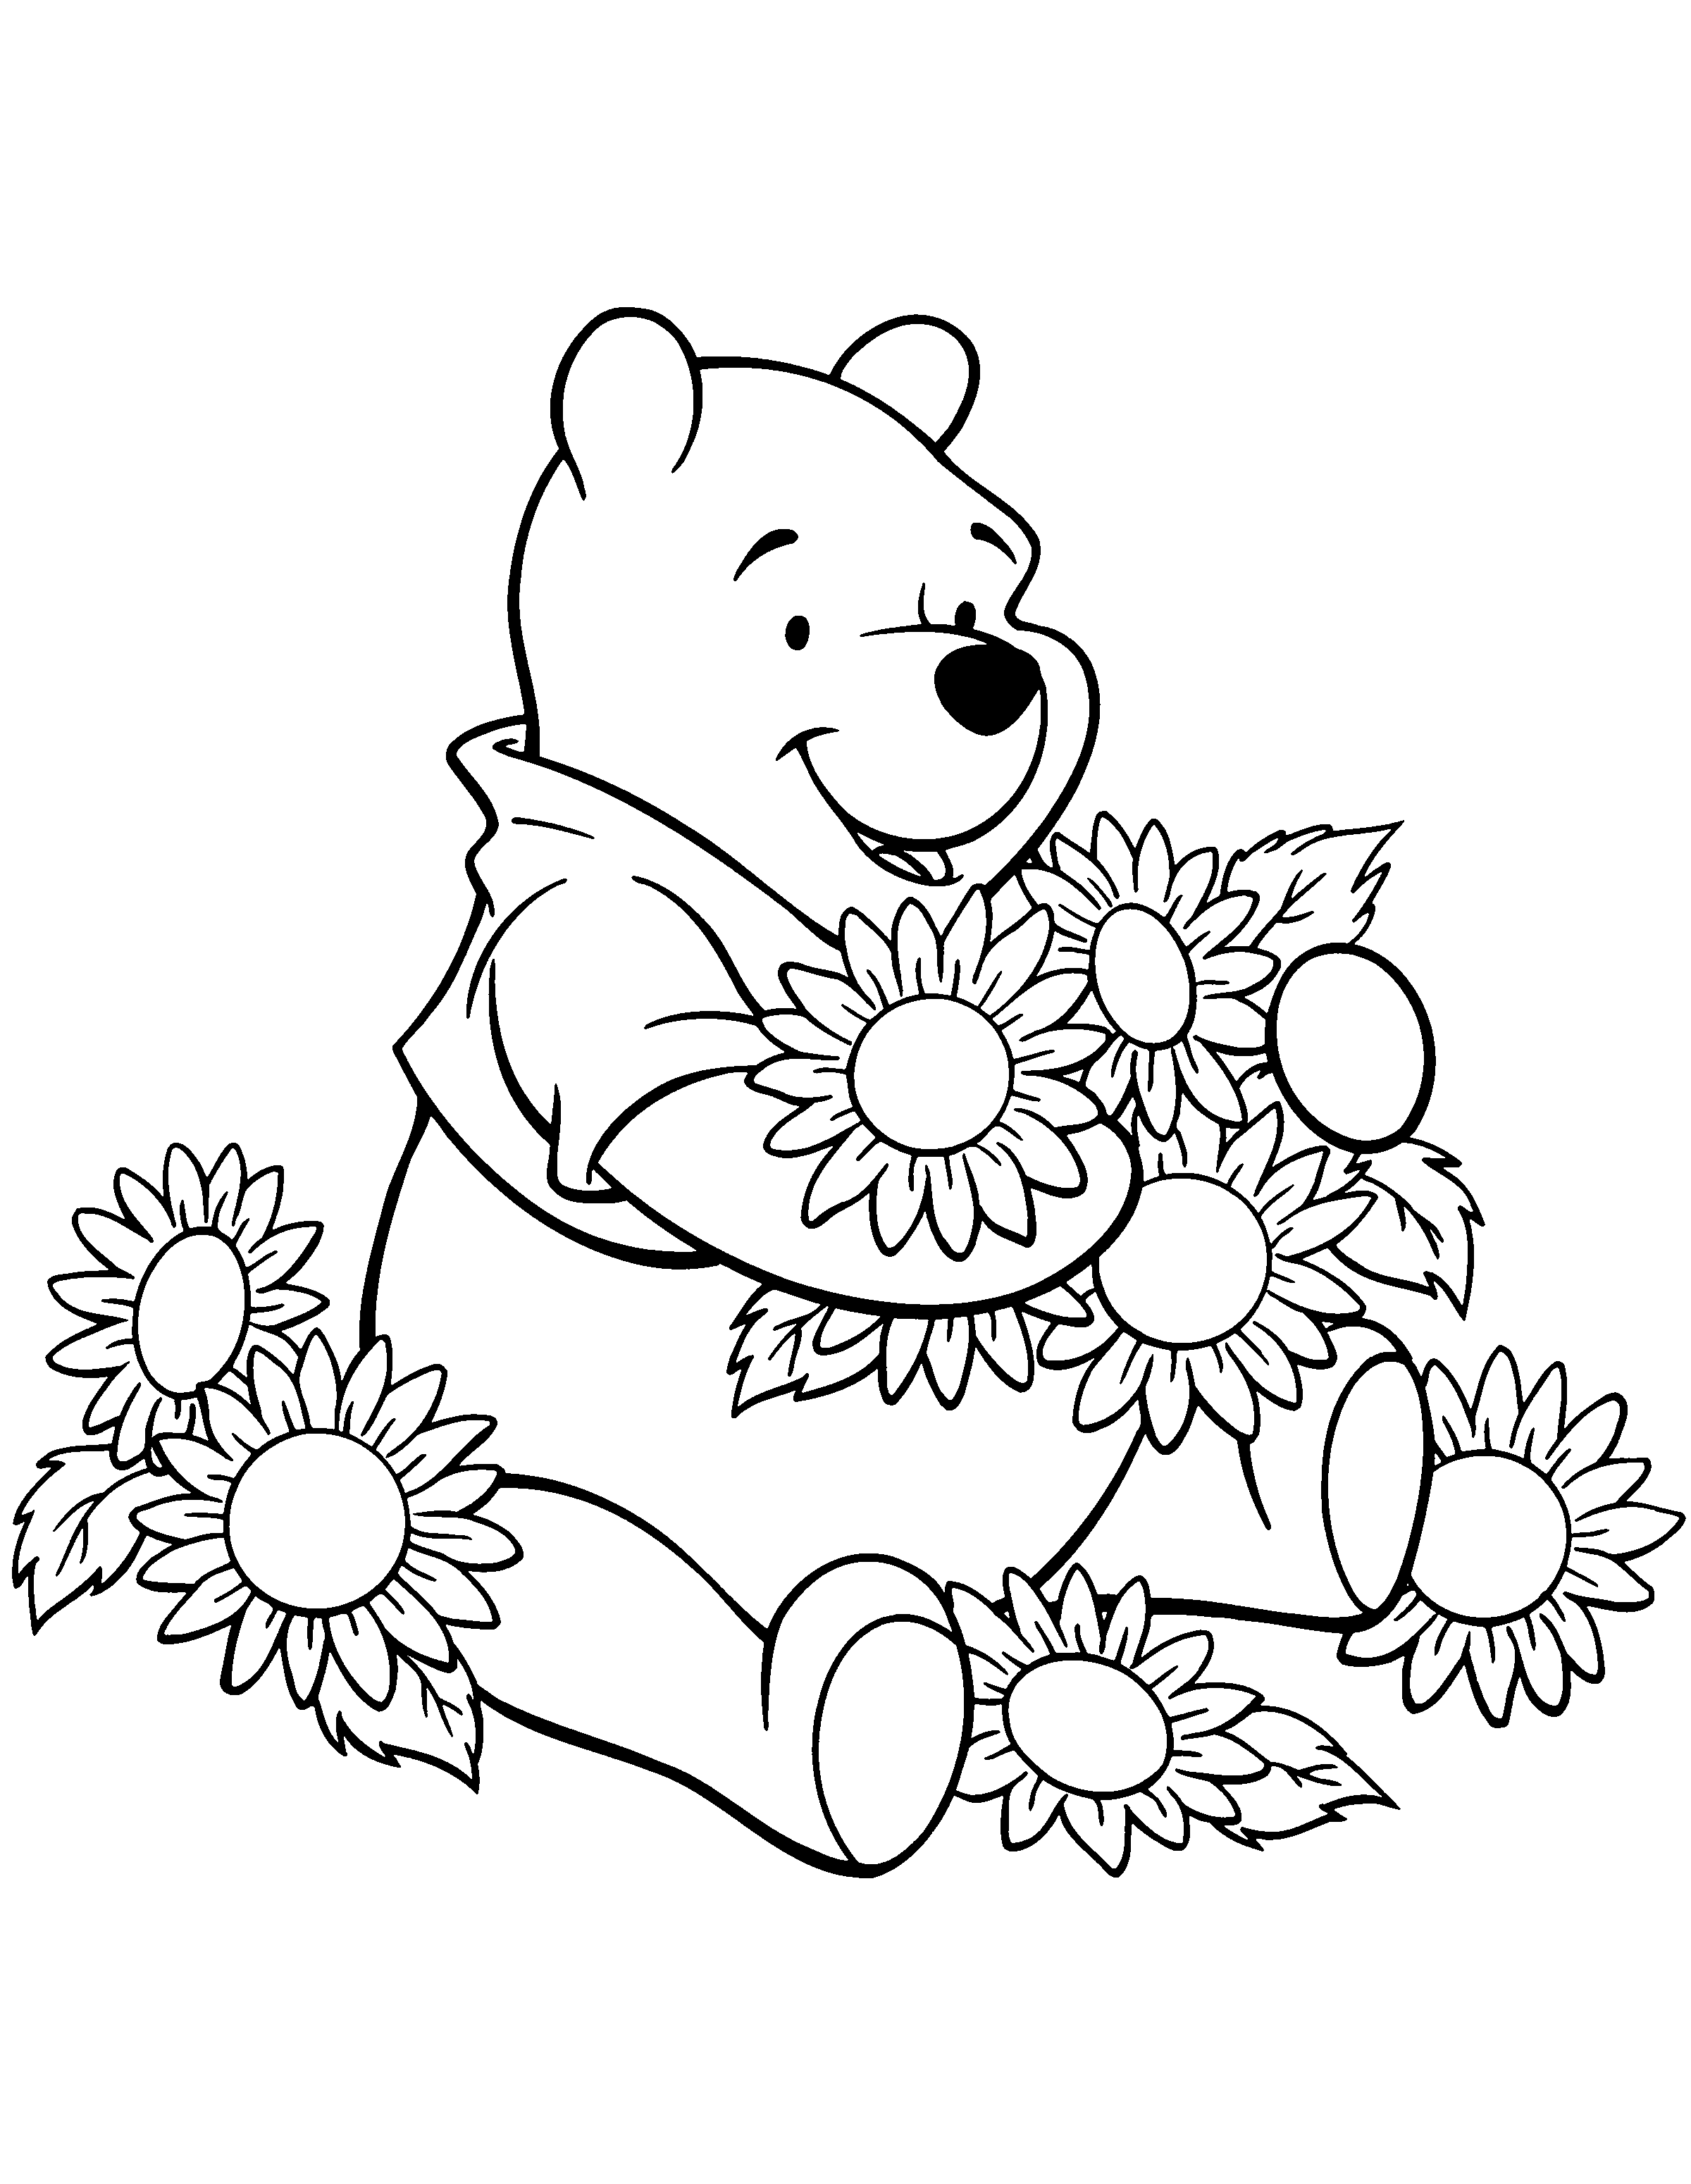 winnie-the-pooh-coloring-pages-14-coloring-kids